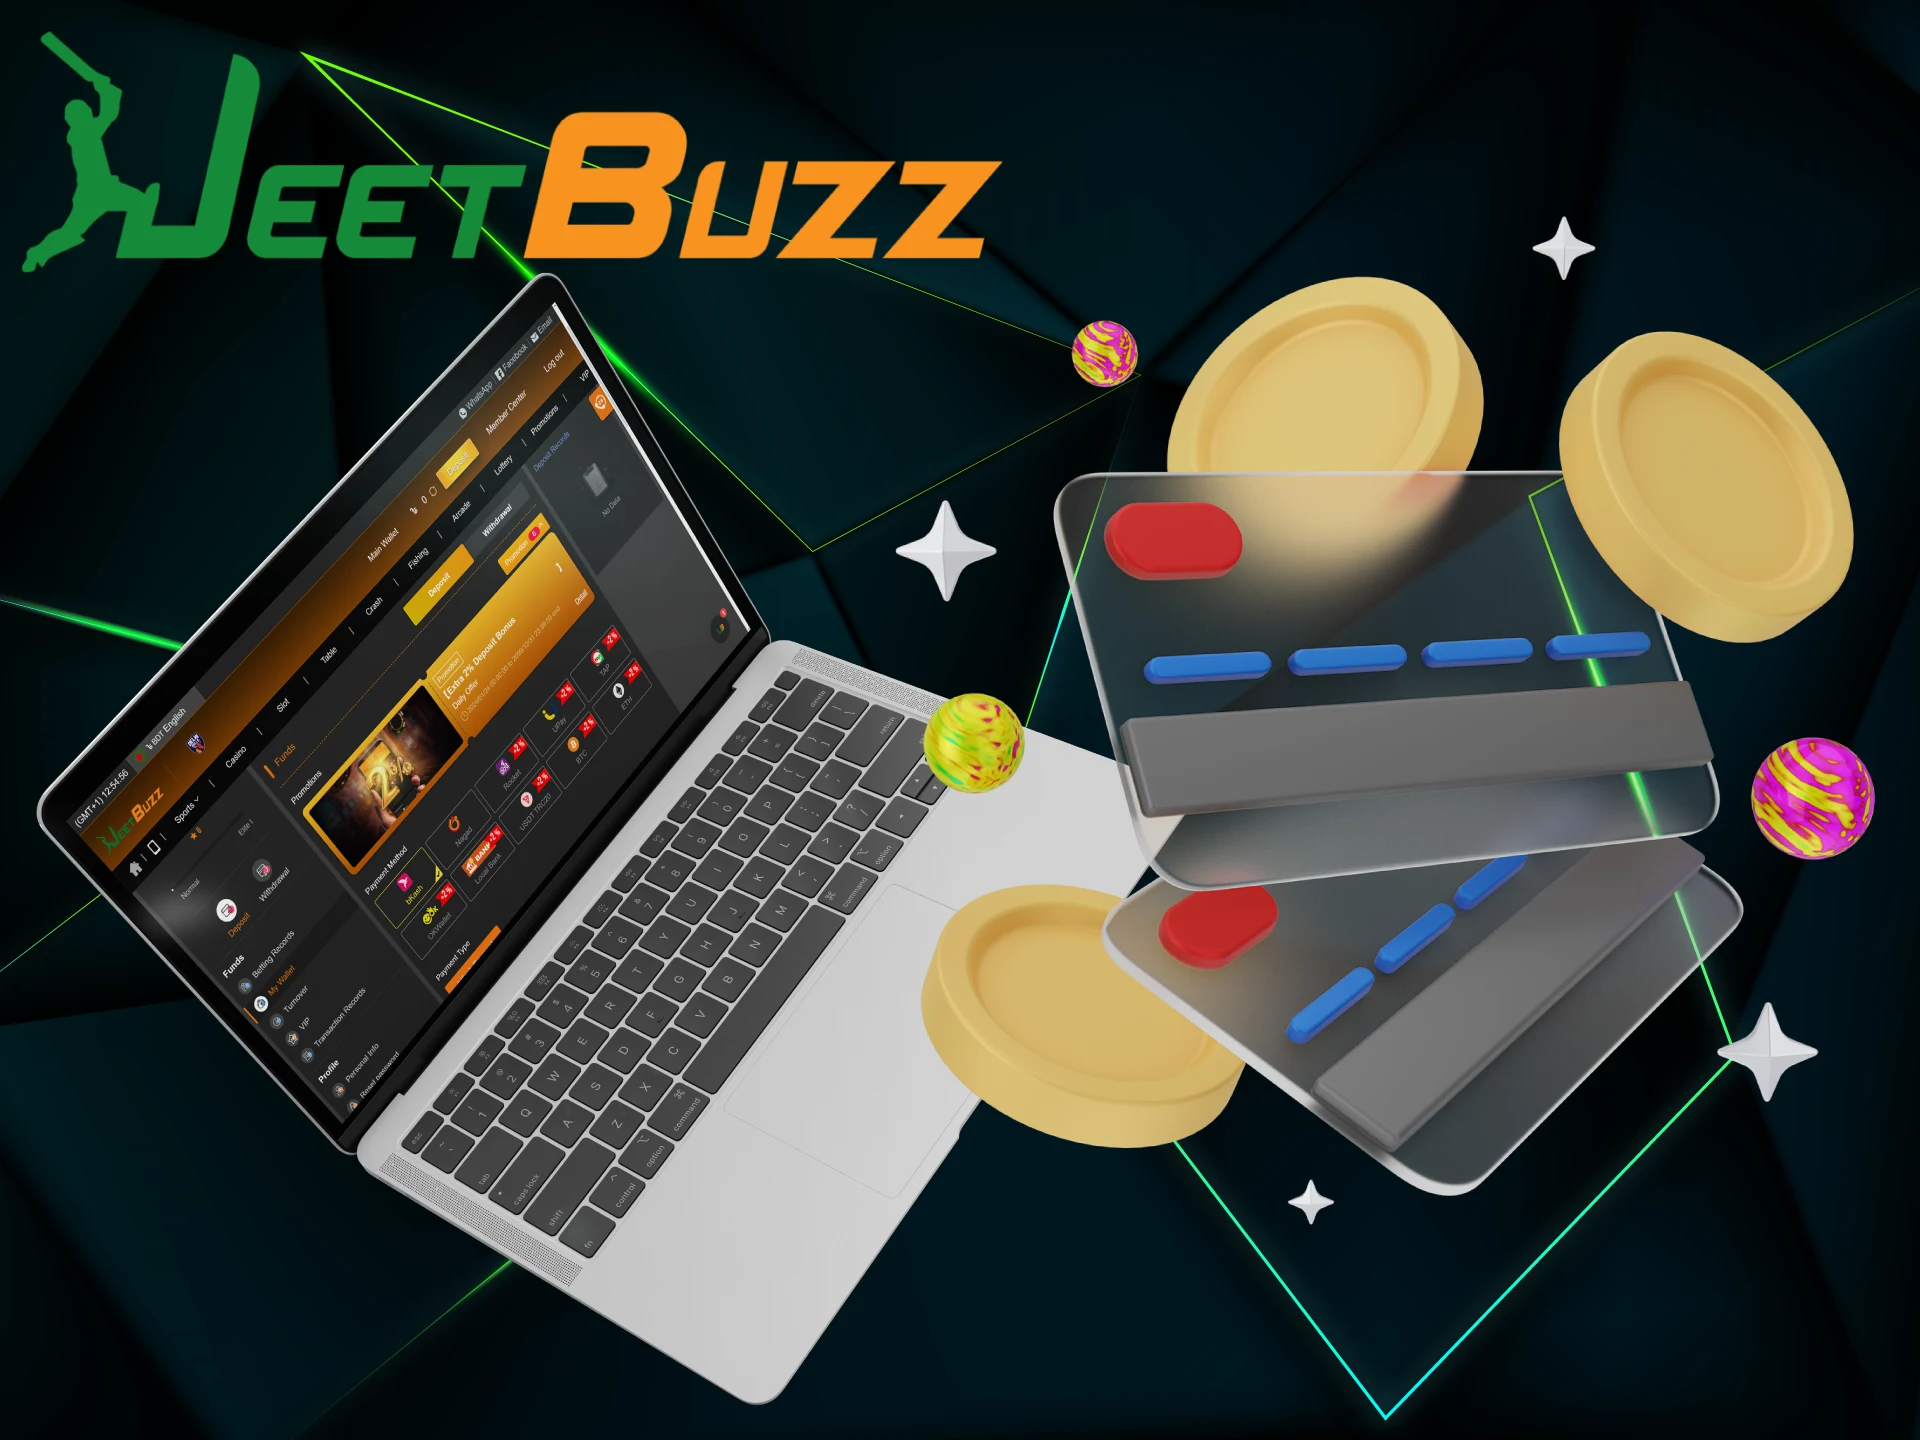 Players from India can seamlessly deposit funds into their JeetBuzz account in a convenient way.